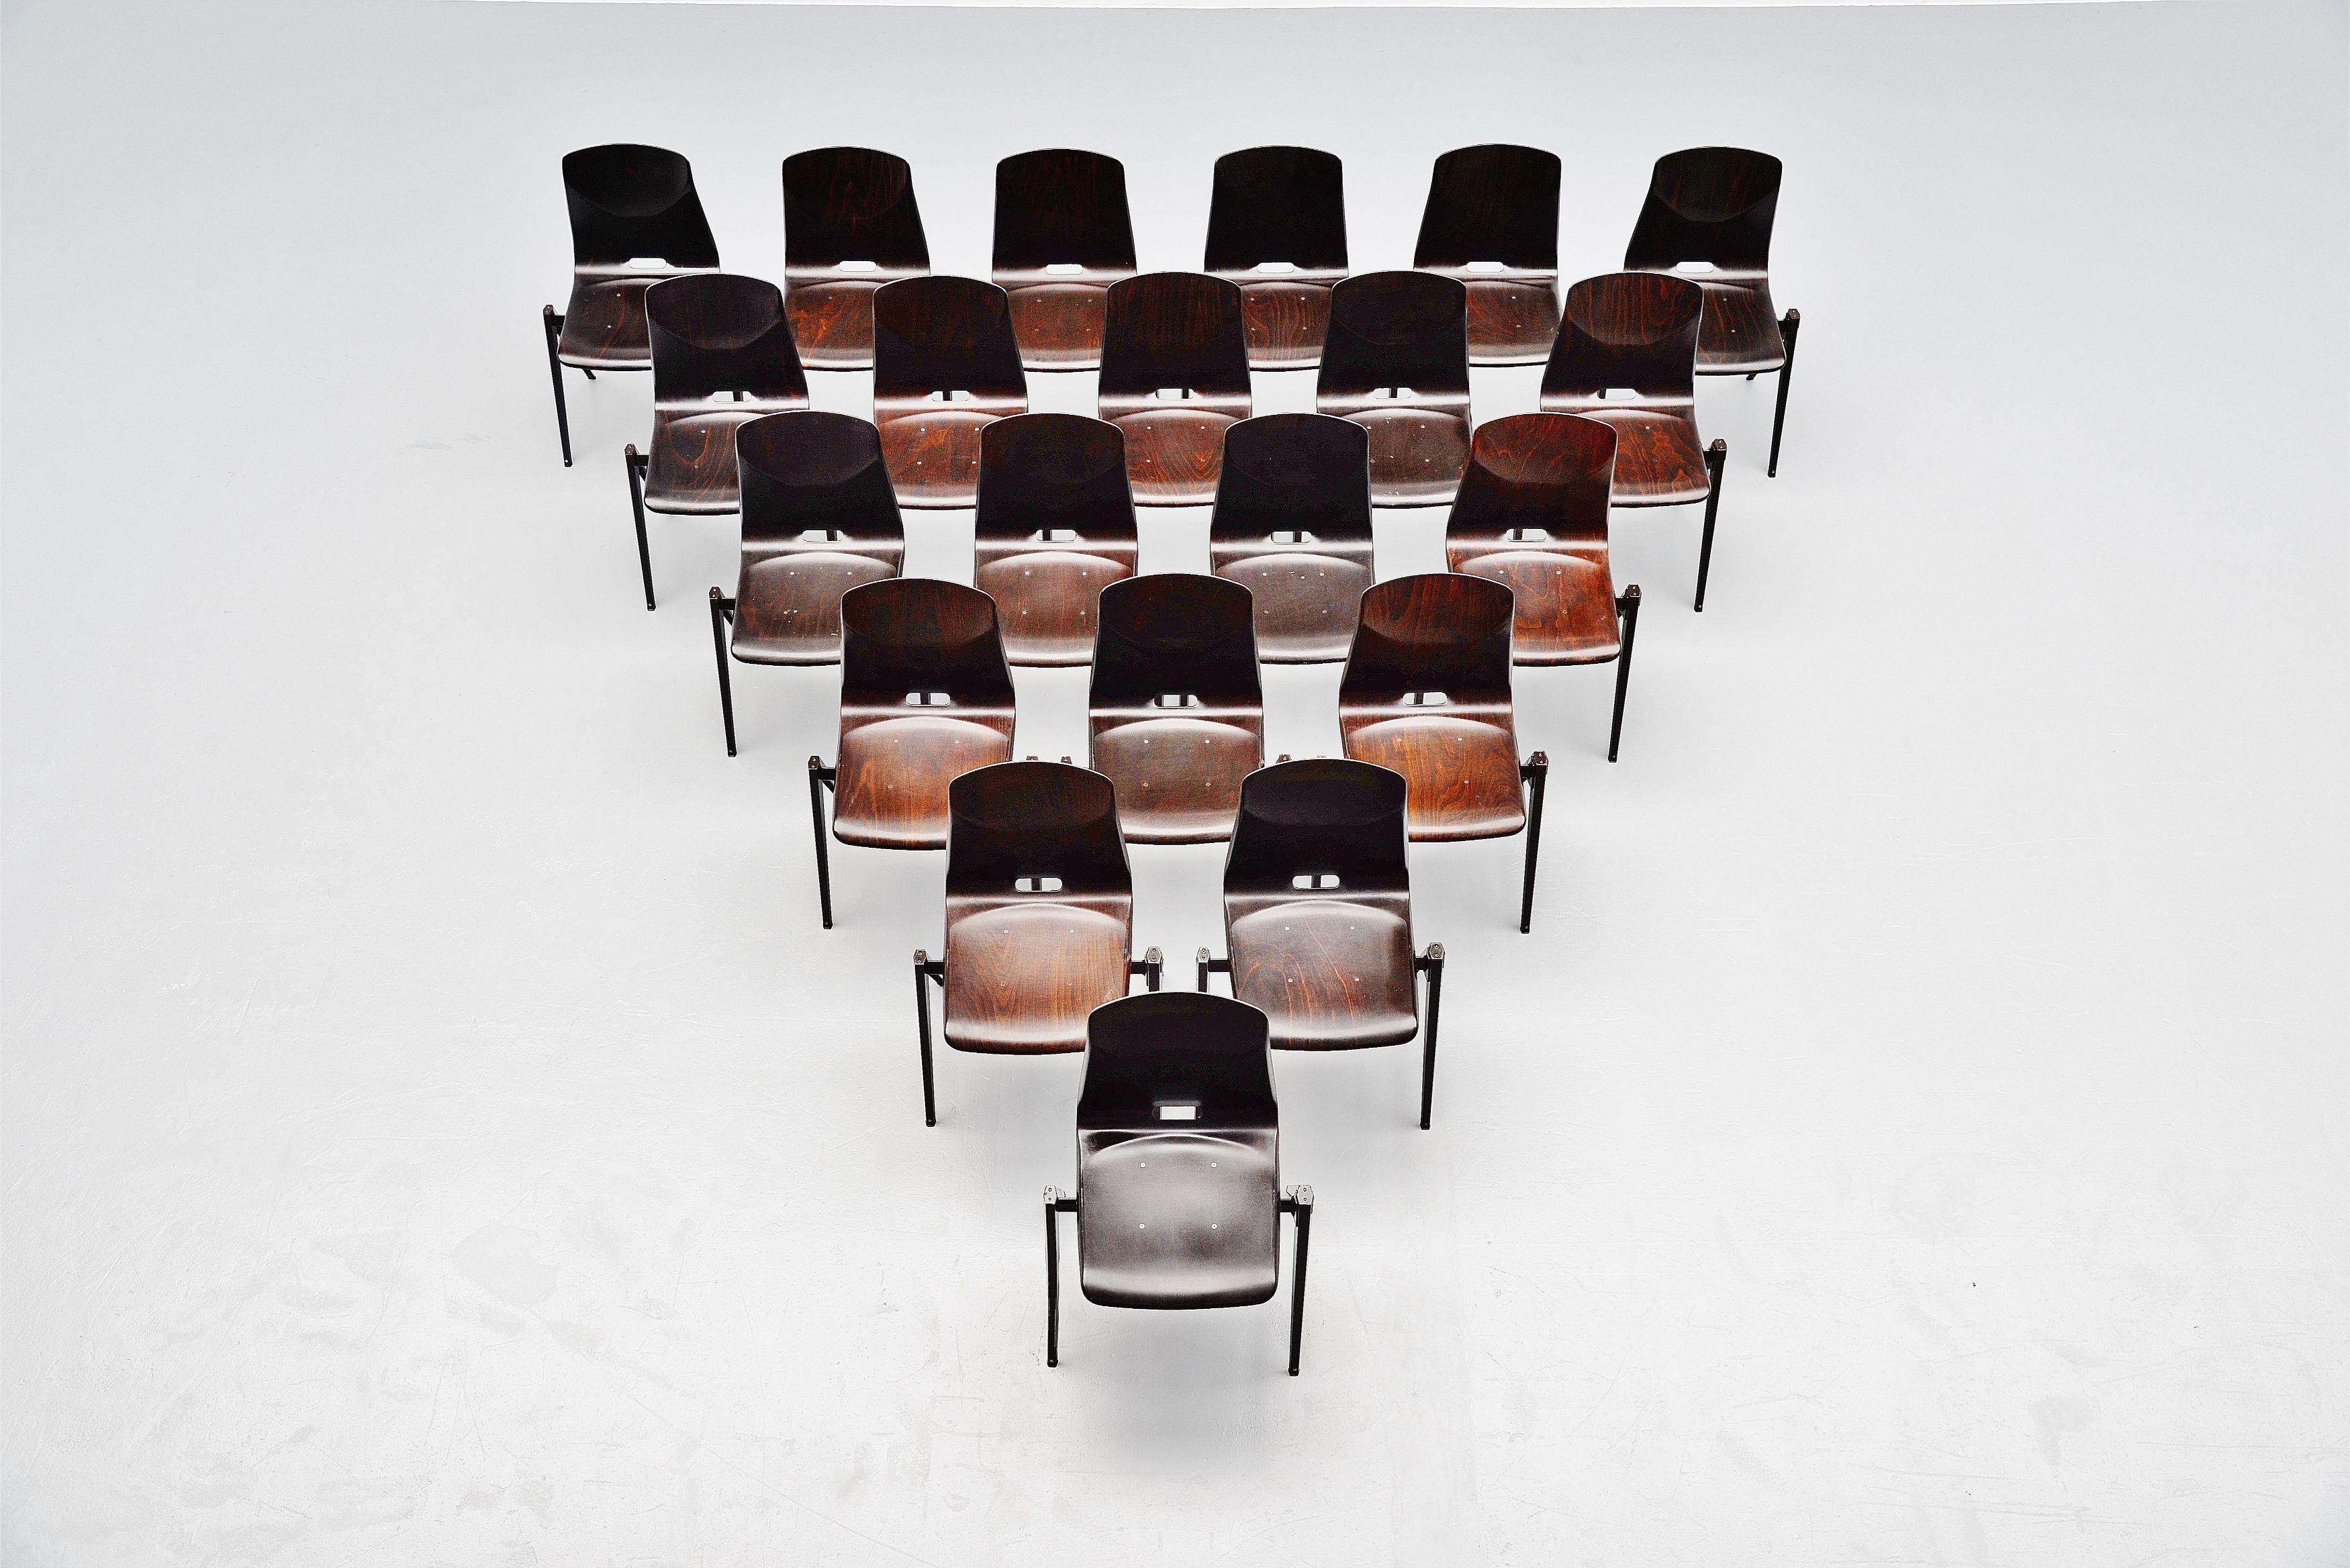 Large set of 22 stacking chairs model S22 designed and manufactured by Pagholz, Germany 1970. We have more chairs available in other colors too, upon request. These chairs have dark brown metal compass shaped v structured frames and really dark